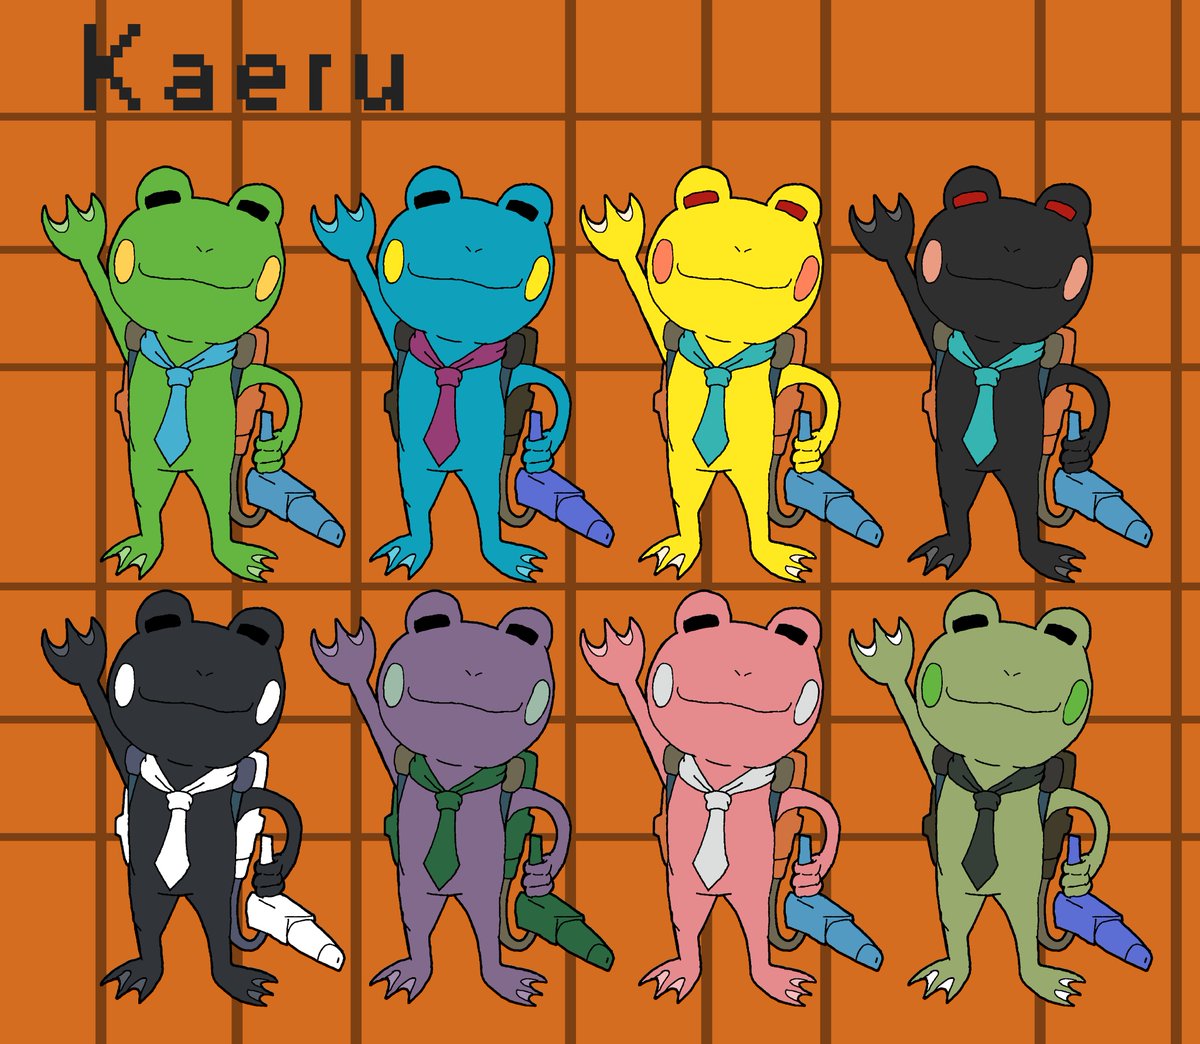 Another set of Smash Pallets,this time its Kaeru of Kero Blaster! Wanted to do another set and focus more on the color choices than a hypotethical moveset, and I had beaten the game...so it seemed fitting. #smashbros #palletswap #myart #myartwork #keroblaster #fanart